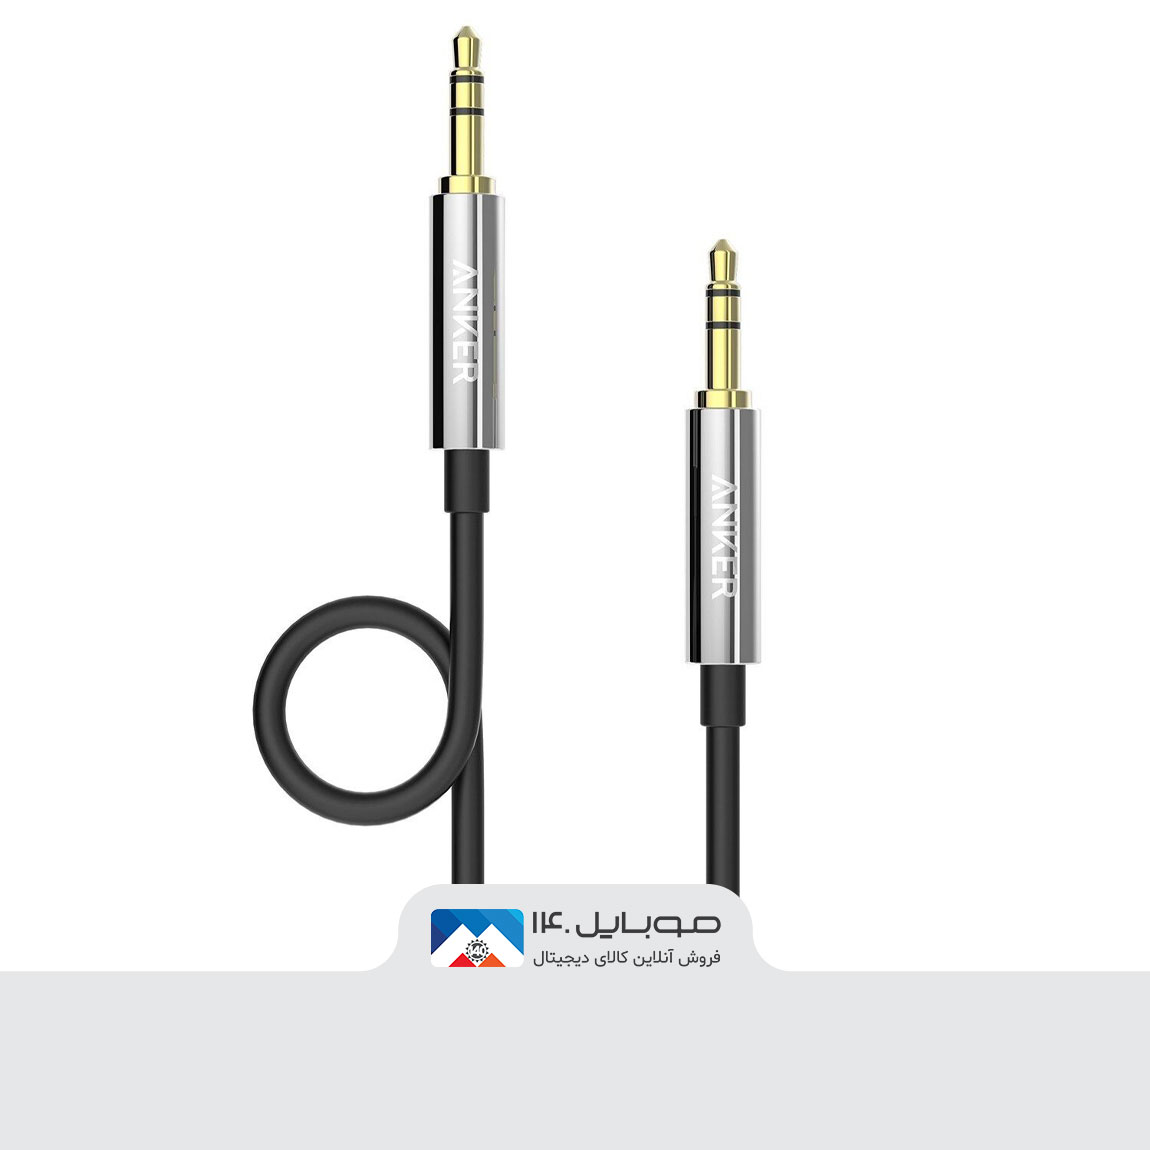 ANKER Auxiliary A7123H12 Audio Cable 2